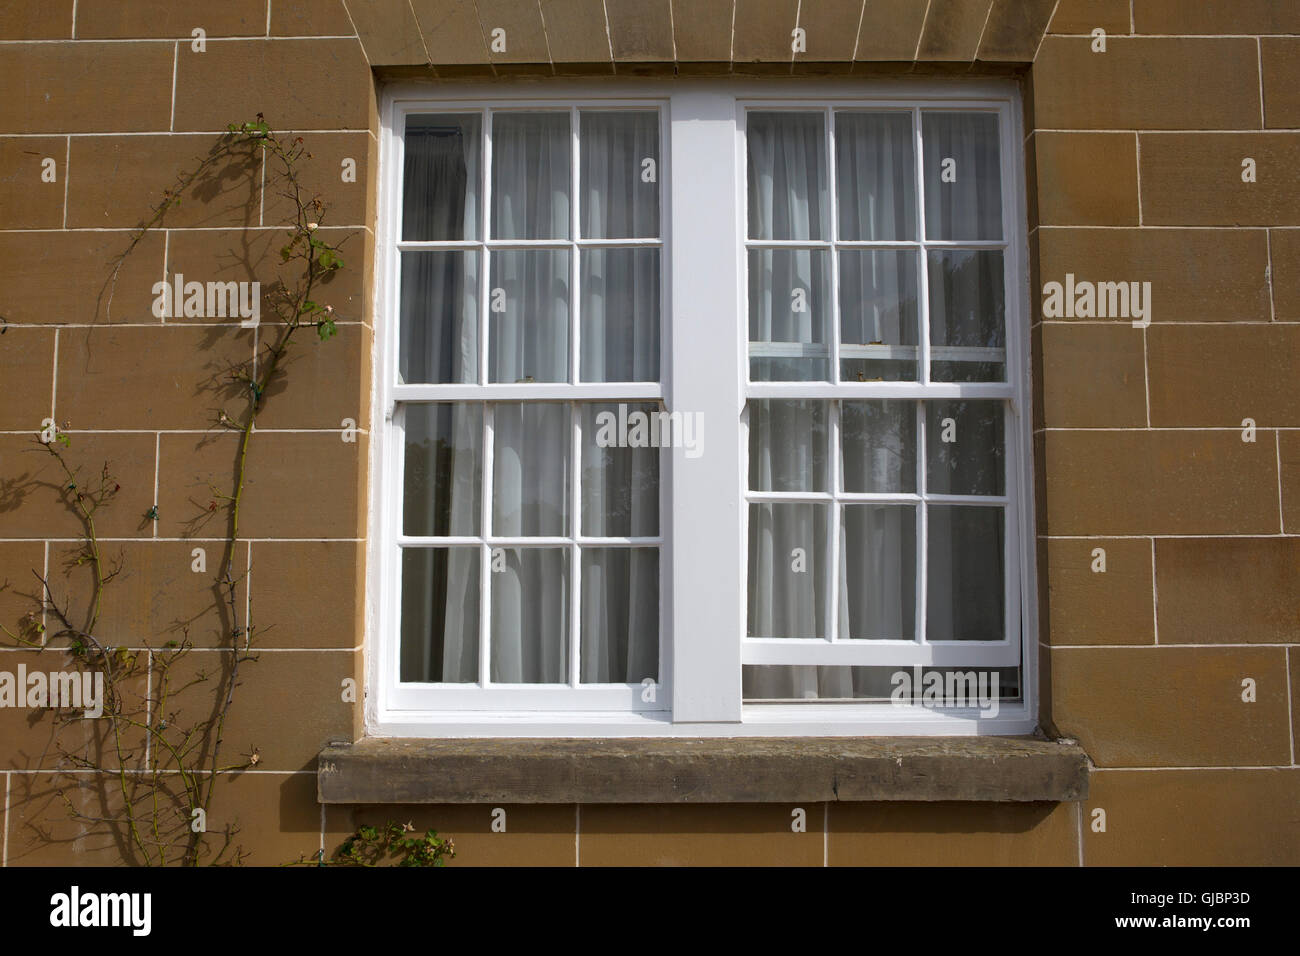 A traditional sash window in Malton, North Yorkshire, United Kingdom. One of the windows is open. Stock Photo